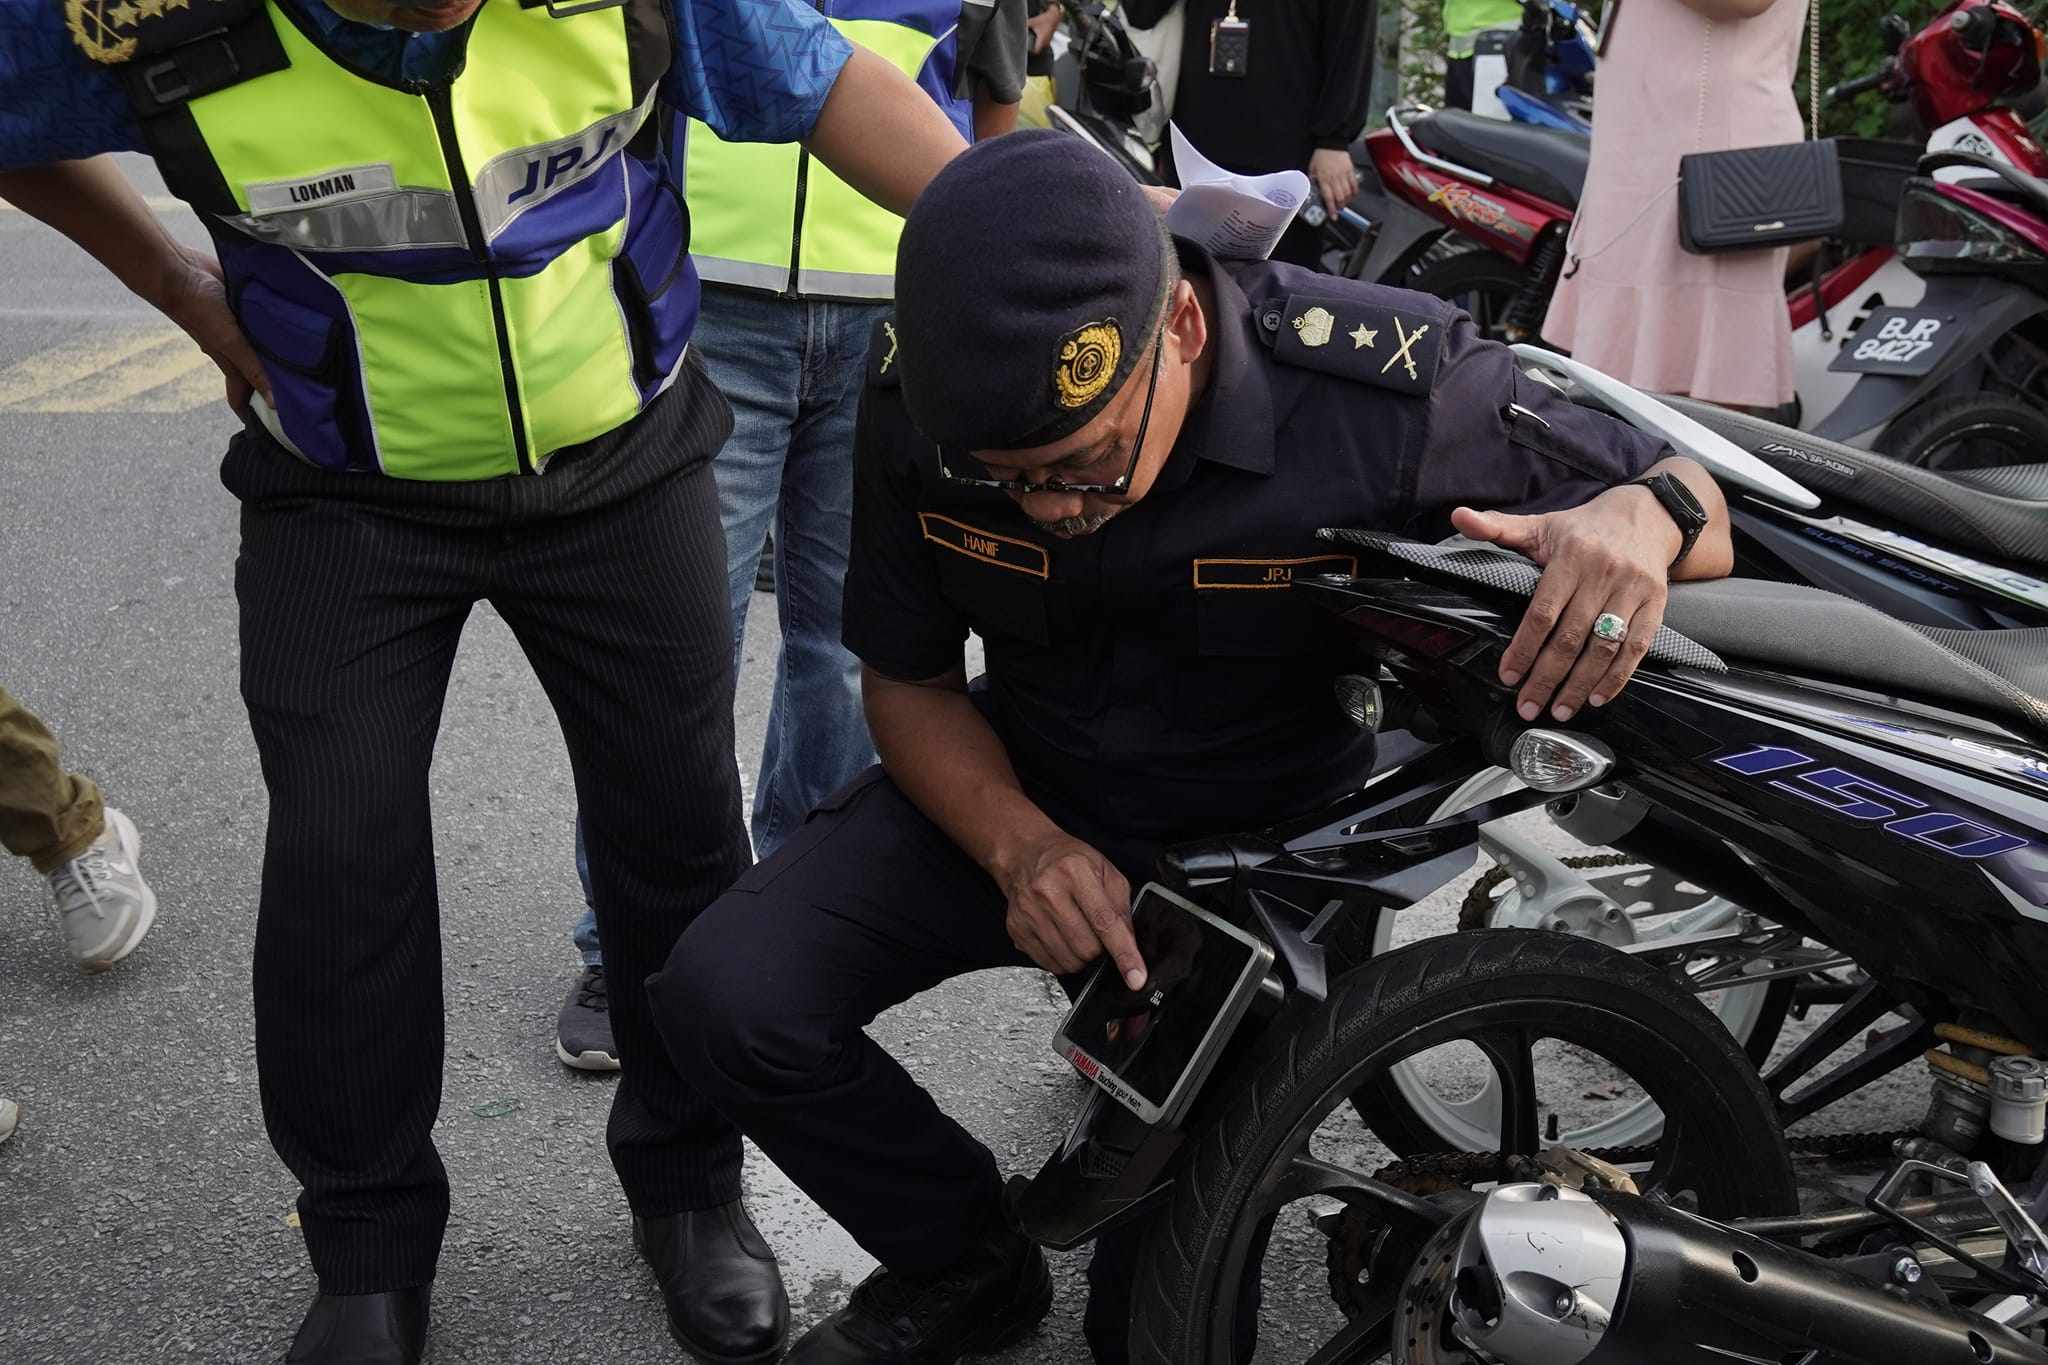 The motorcycle licence plate discovered by Malaysian police was smaller than one of the officer’s fingernails, and its numbers could barely be seen. Photo: Facebook/Jabatan Pengangkutan Jalan Malaysia